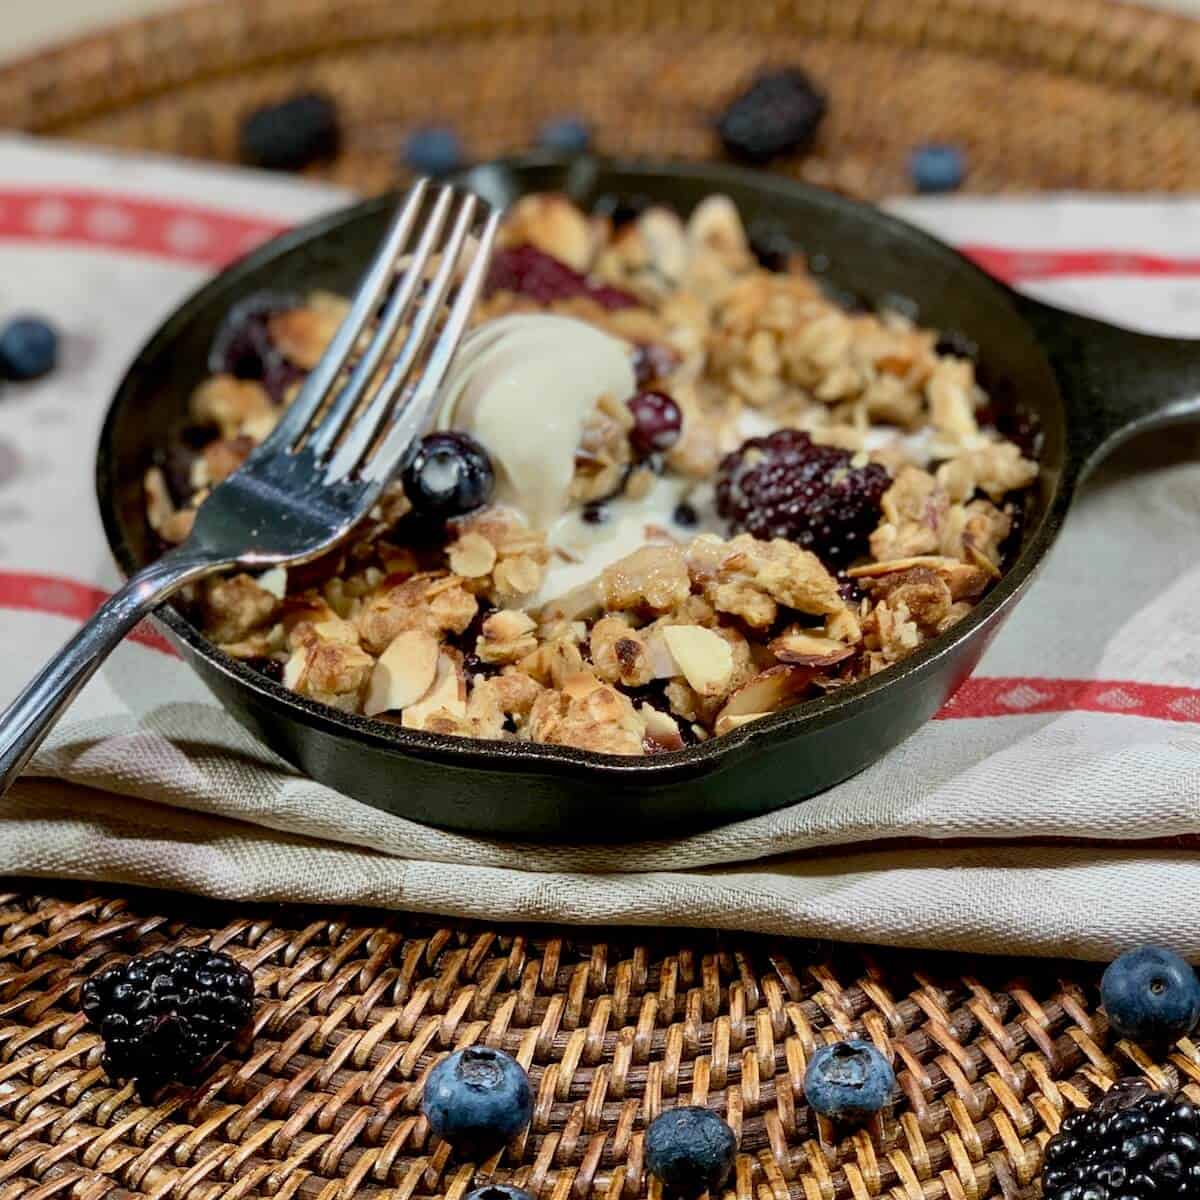 Mini Skillet Berry Crisp on a red & white striped towel with fork & scoop of vanilla ice cream surrounded by blueberries on a wooden tray.